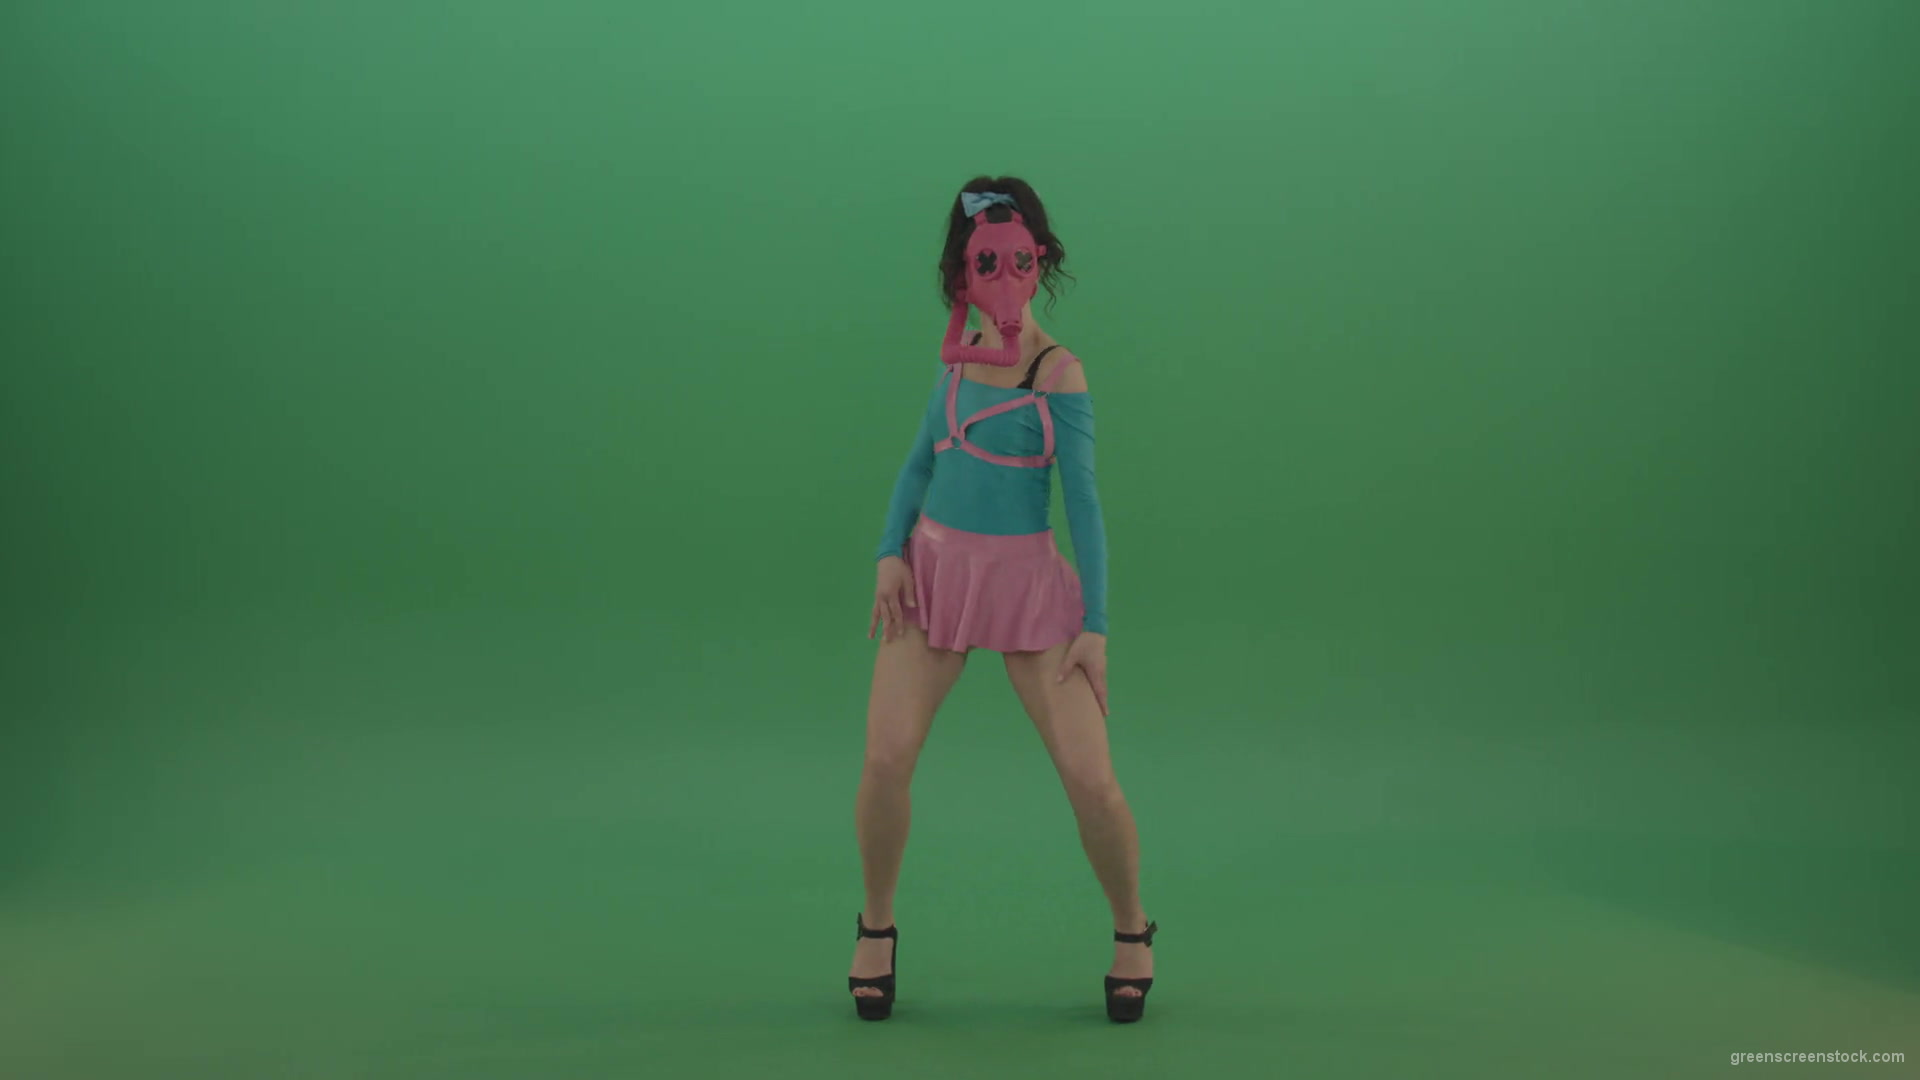 Fetish-Go-Go-Girl-dancing-in-pink-gas-mask-over-green-screen-4K-Video-Footage-1920_006 Green Screen Stock